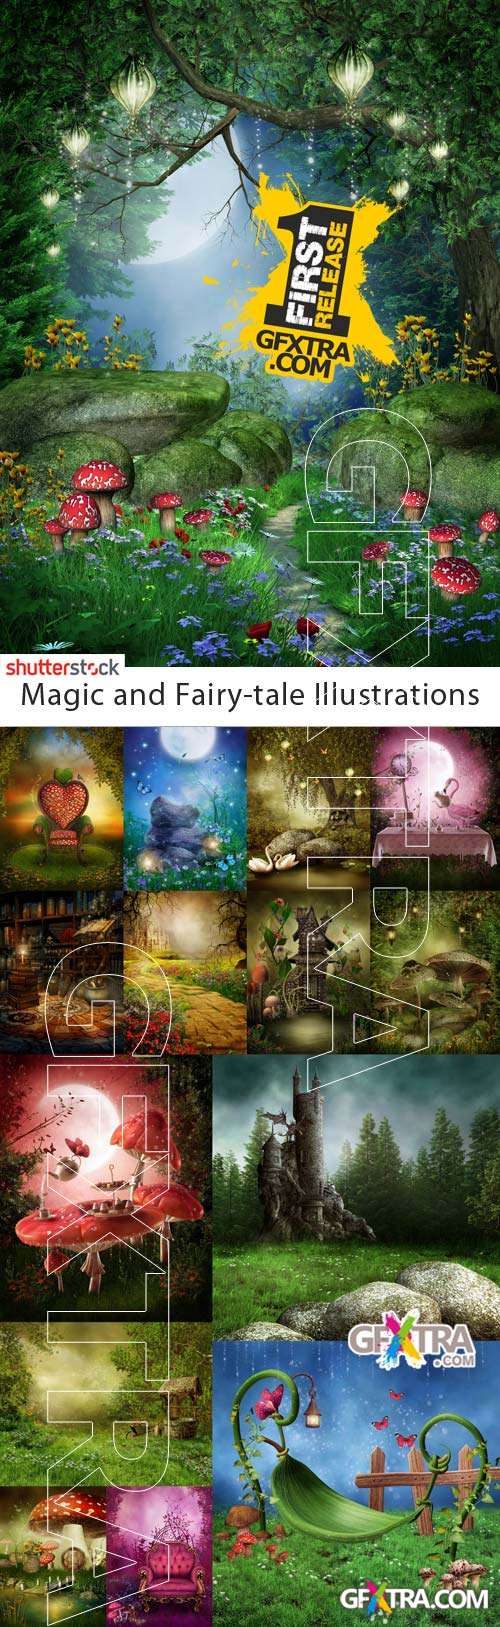 Magic and Fairy-tale Illustrations - 25 HQ Stock Images